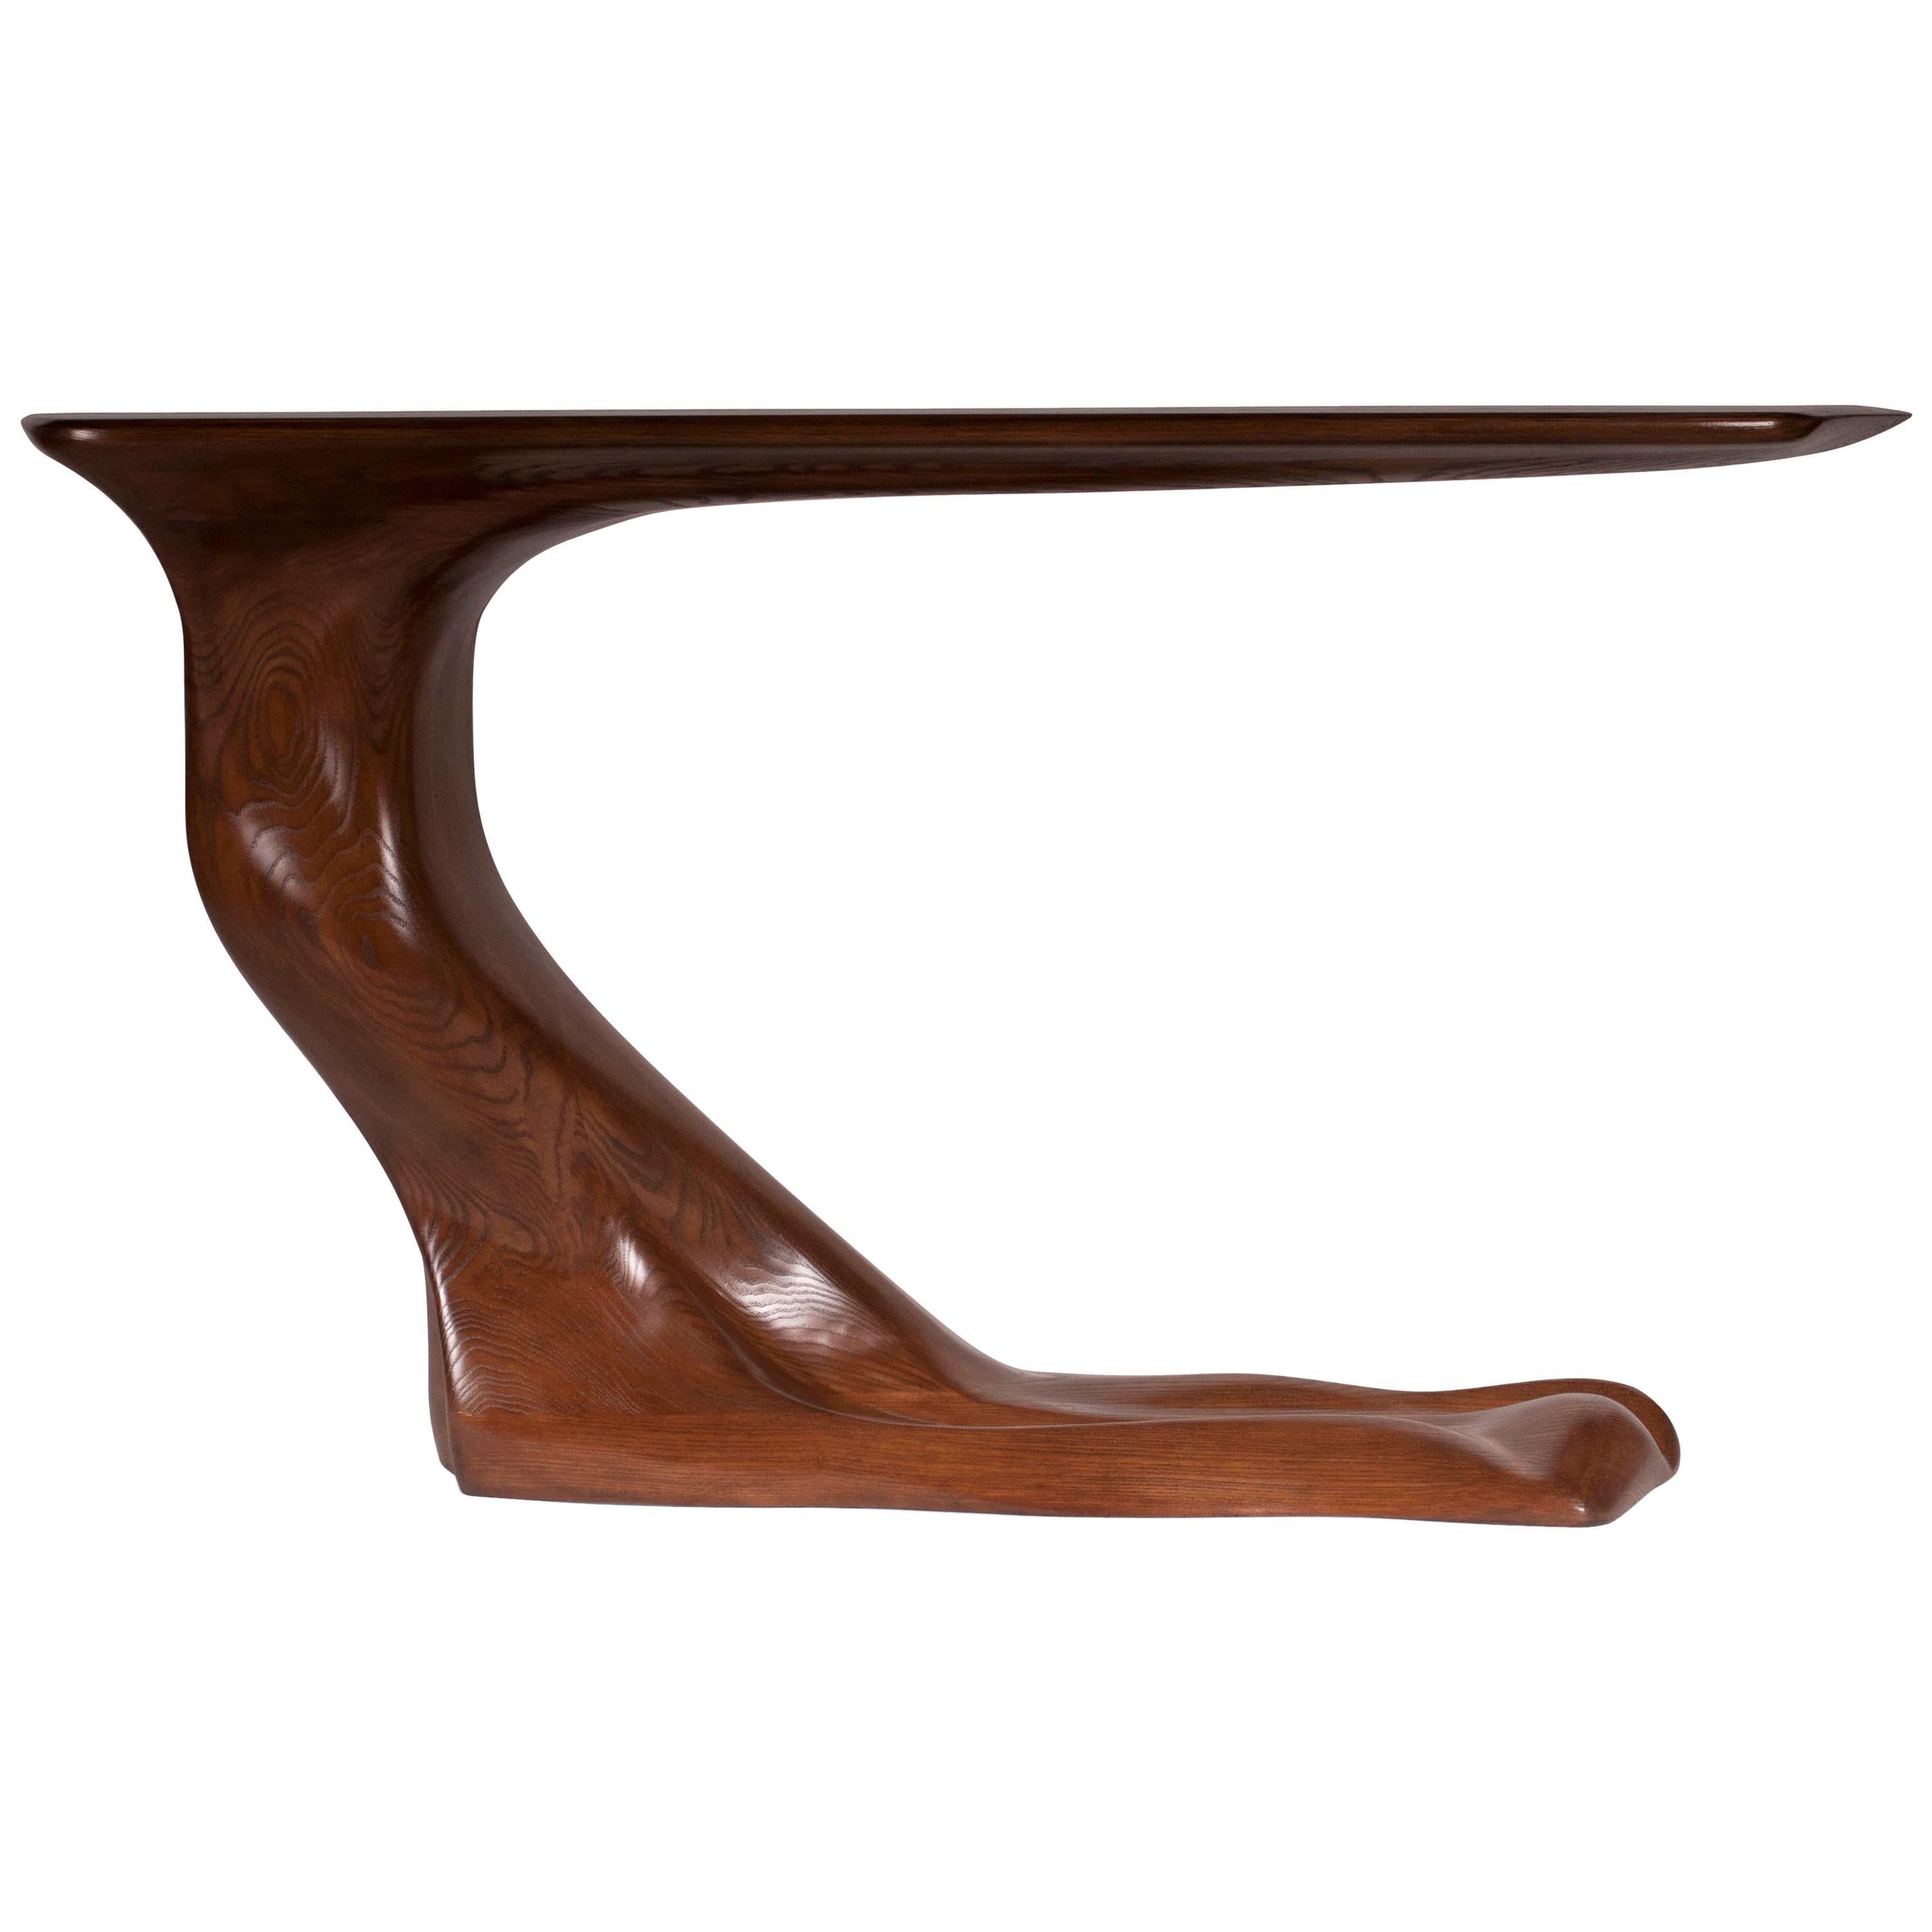 Amorph Frolic Console Table, Walnut Stained, by Amorph